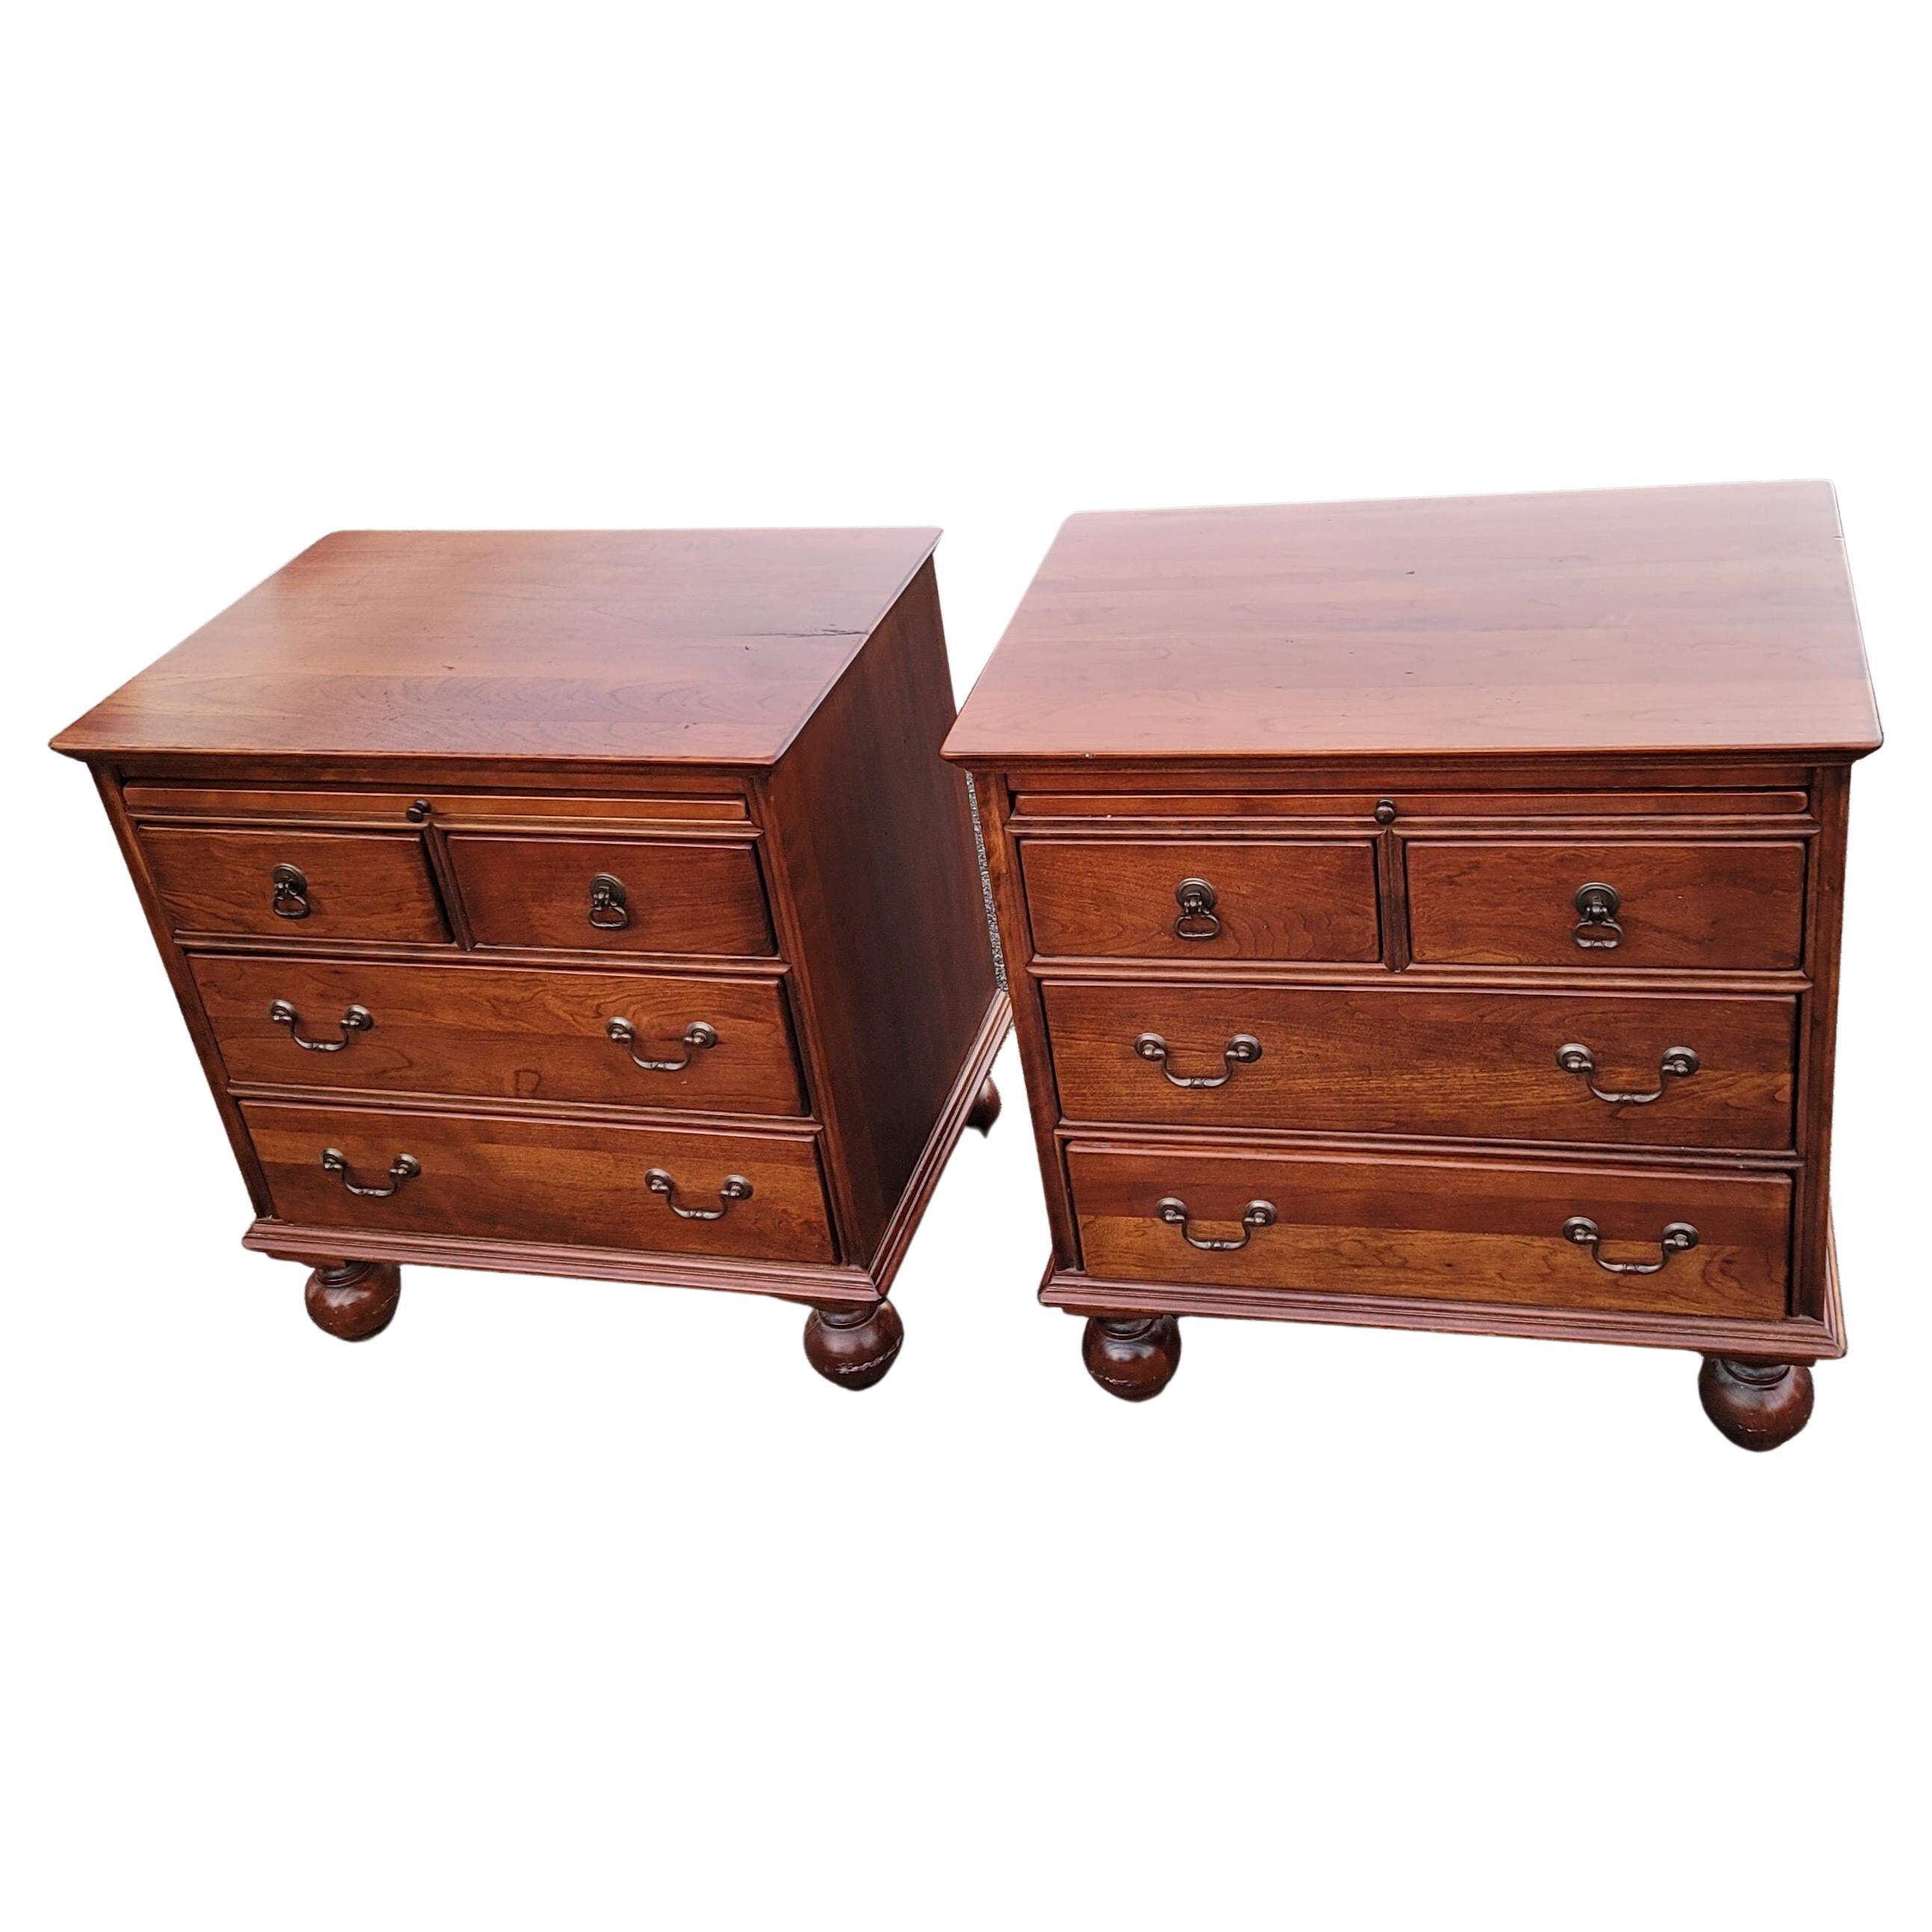 Bob Timberlake Collection
Lexington Cherry Carolina Night Chest Nightstand Side Table #833-621.

Feature William and Mary feet, dove tail drawers. One drawer has 